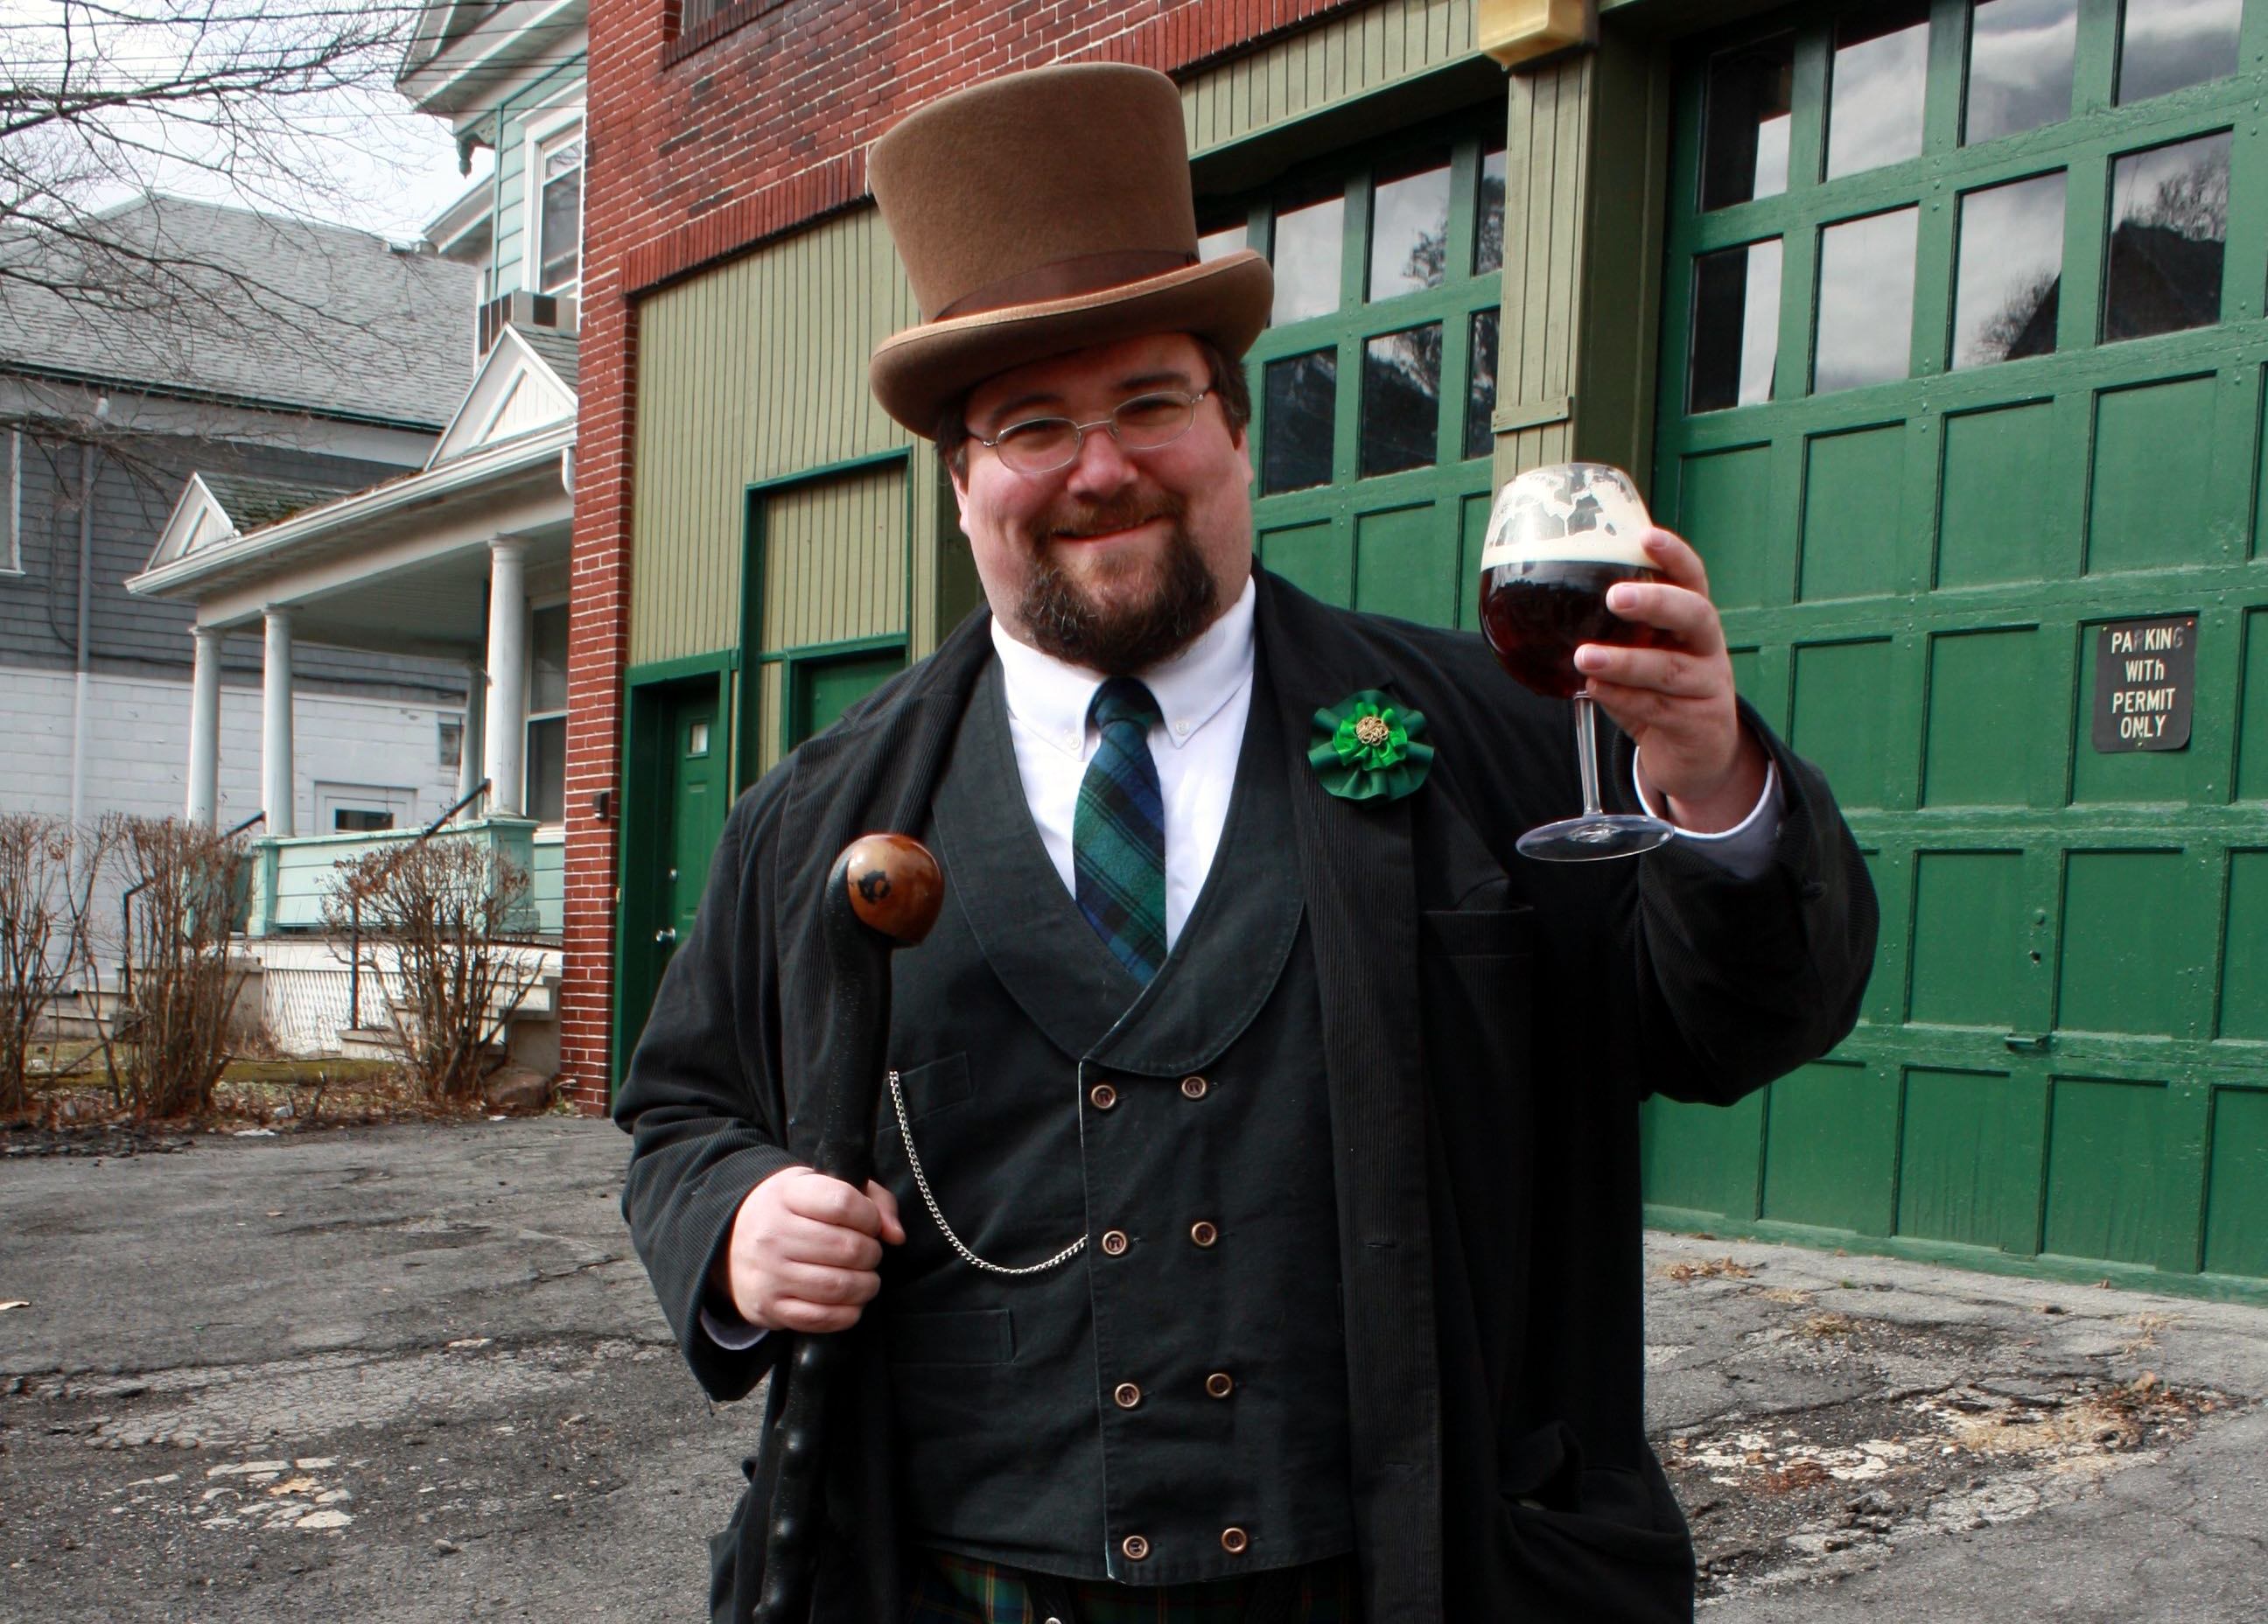 A decked-out Peter Sheey takes part in the spectacle, beer in hand. 